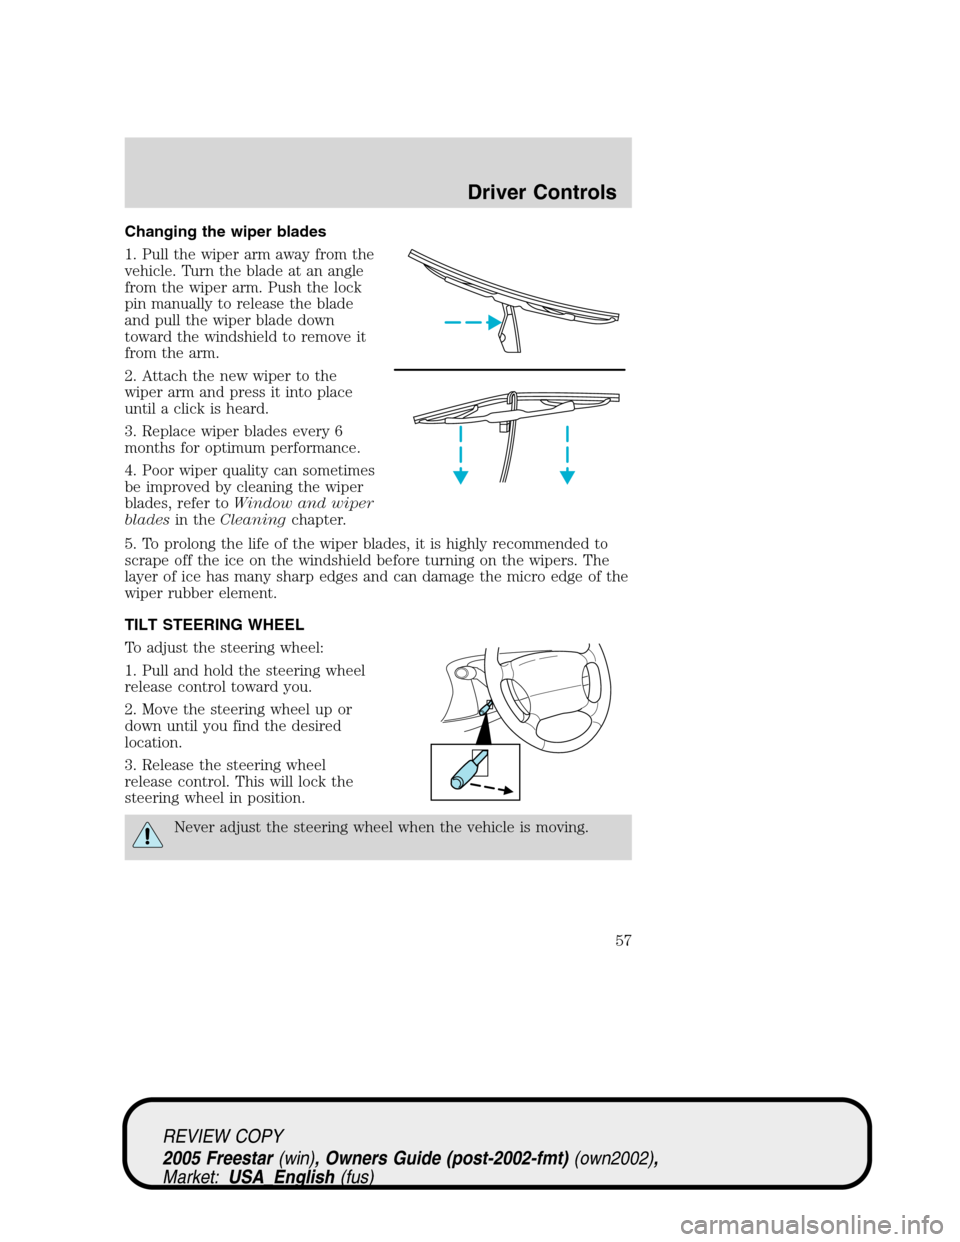 FORD FREESTAR 2005 1.G Owners Manual Changing the wiper blades
1. Pull the wiper arm away from the
vehicle. Turn the blade at an angle
from the wiper arm. Push the lock
pin manually to release the blade
and pull the wiper blade down
towa